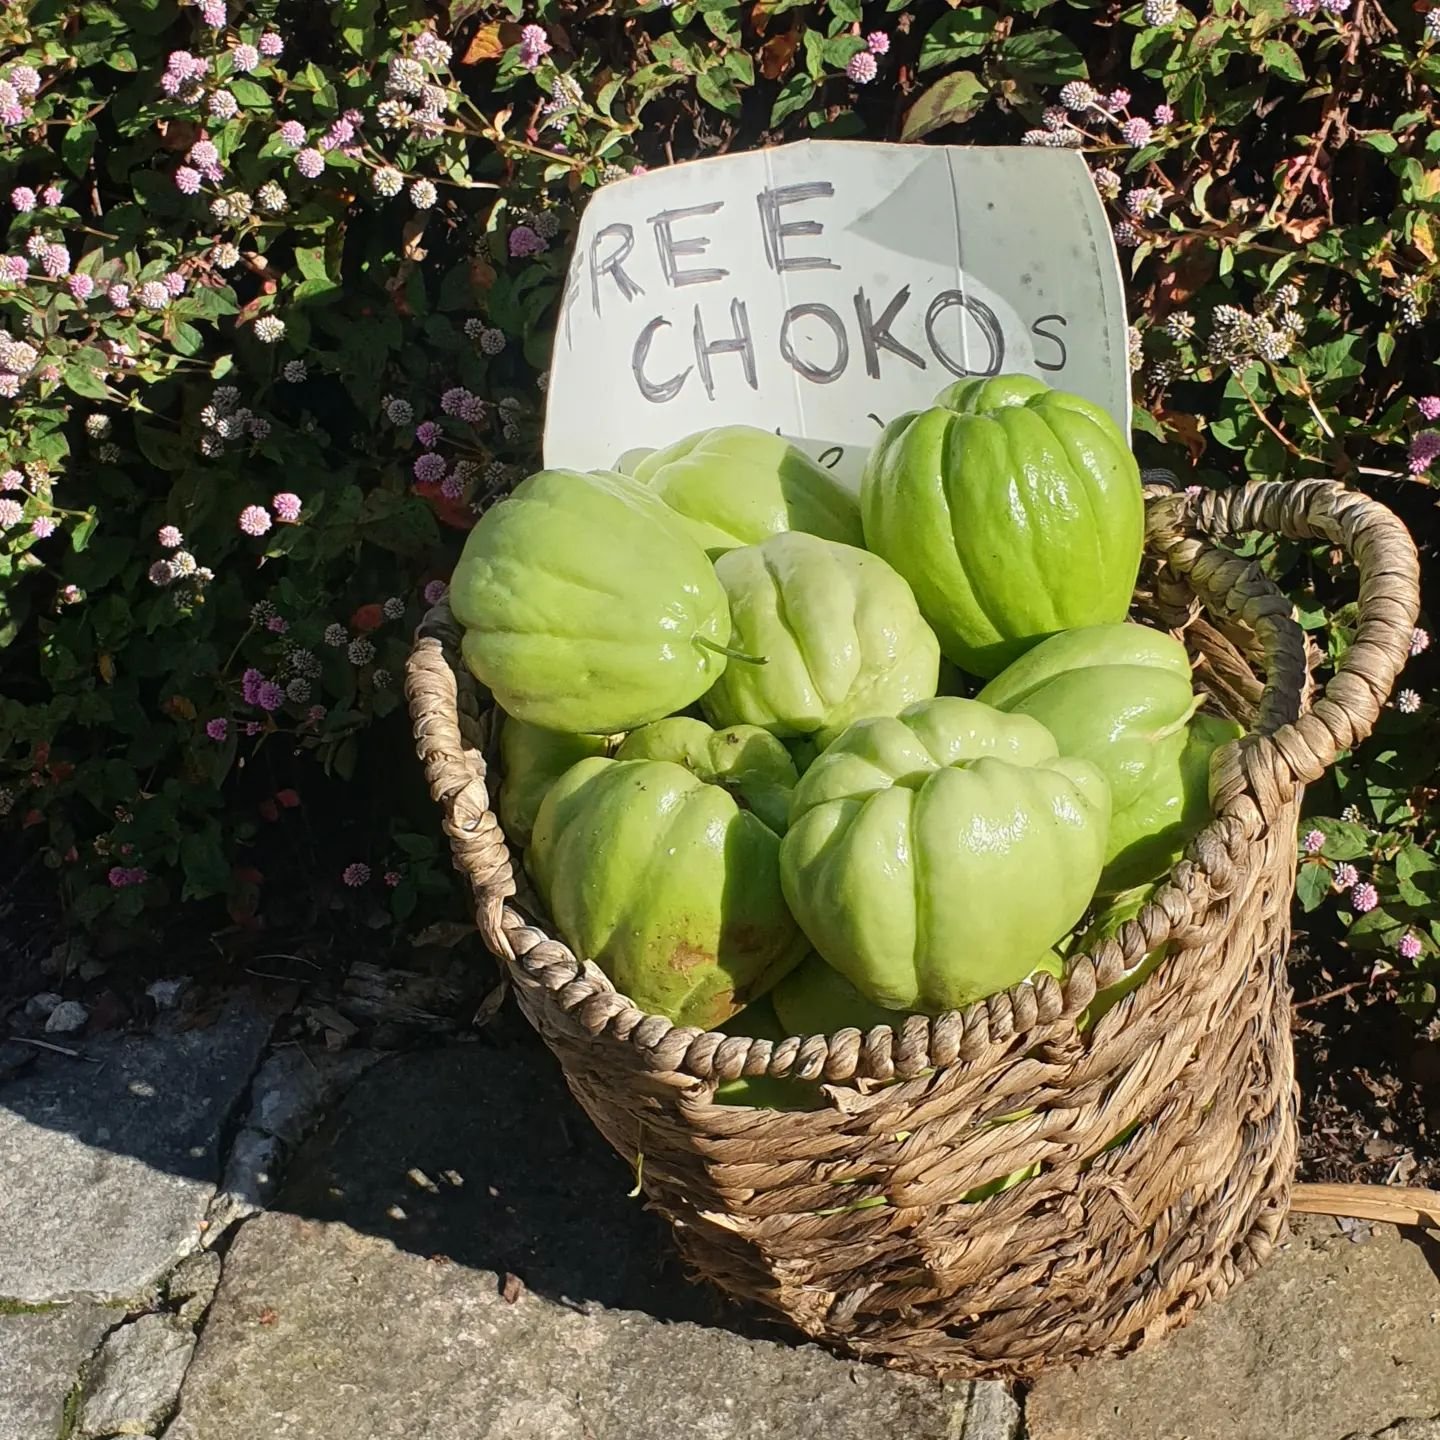 Yep it's that time of year again! My spirit vegetable (well really a fruit) is once again providing it's bountiful harvest.🌱 If you live in the hood, you know where to find this free food!

Growing chokoes has saved so much $$ in groceries over the 